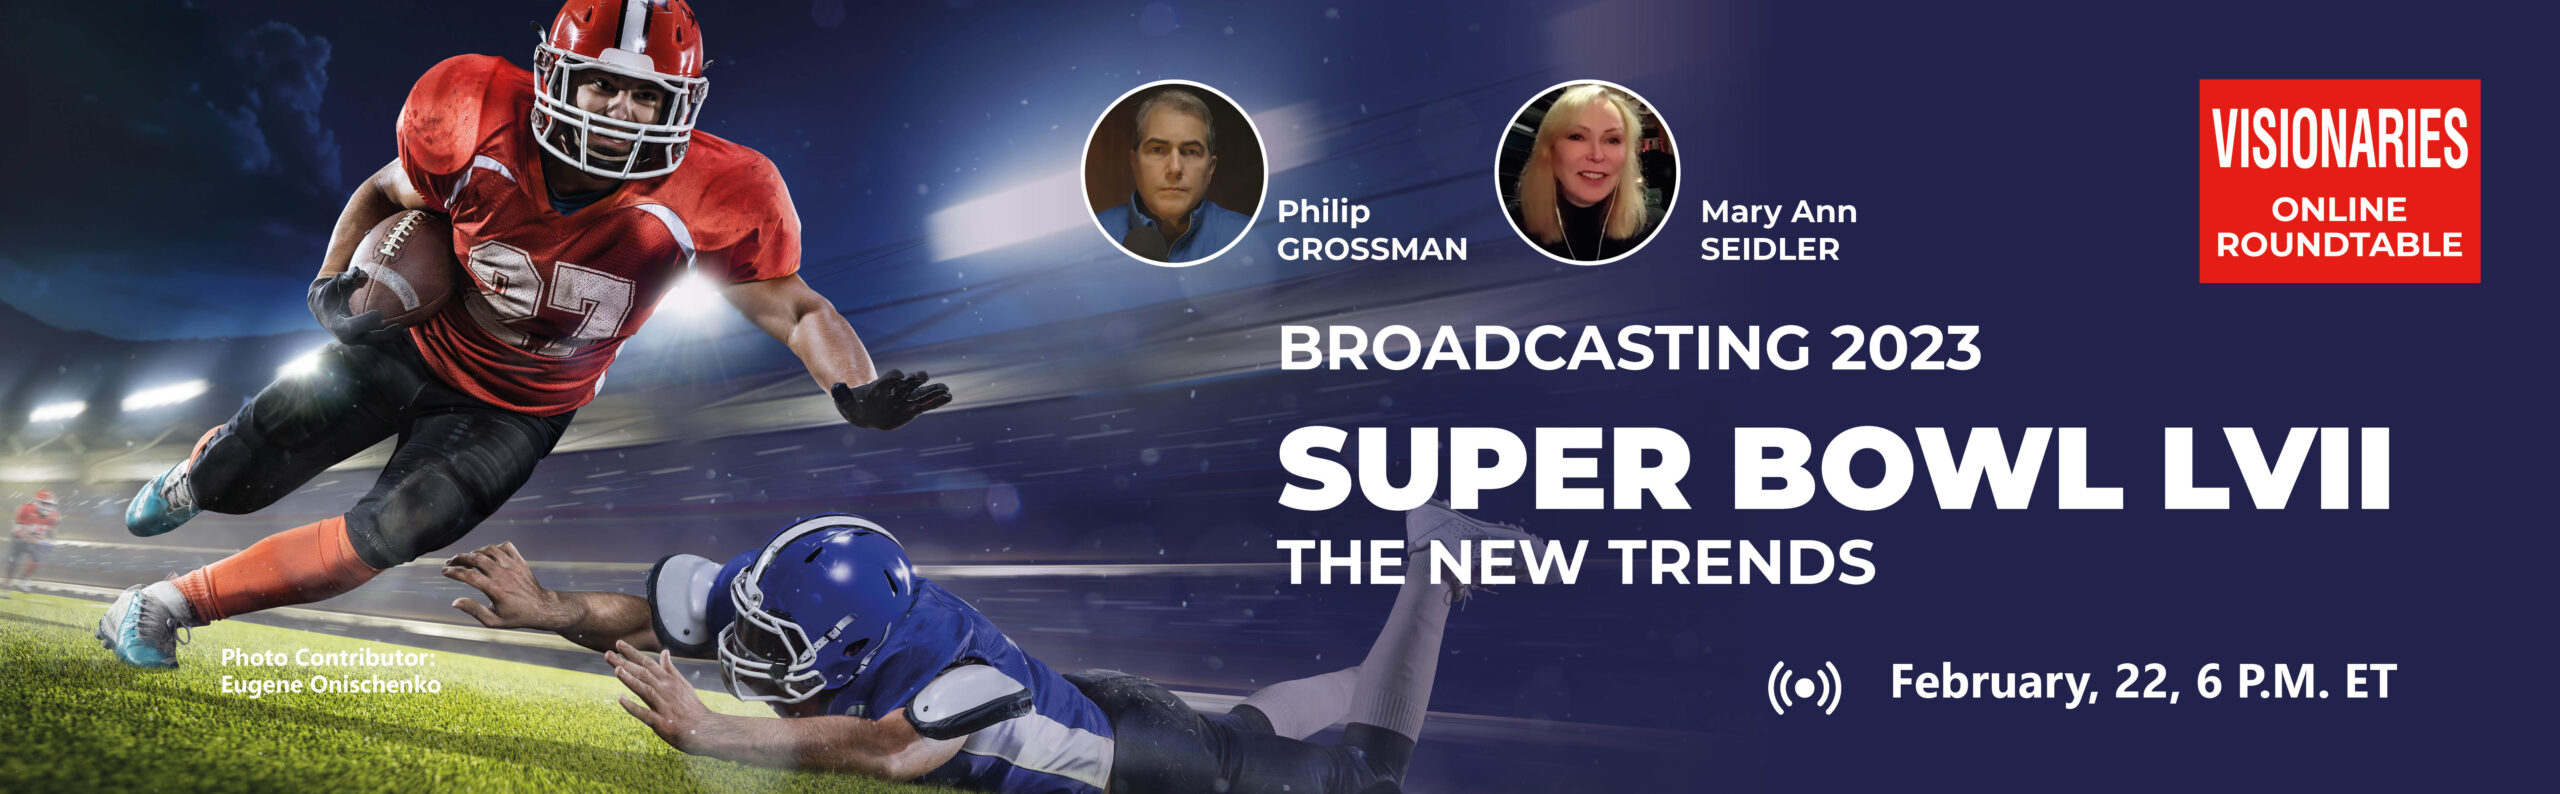 Visionaries Online Round Table with the subject «Broadcasting 2023. Super Bowl LVII: The new trend» tkt1957.com